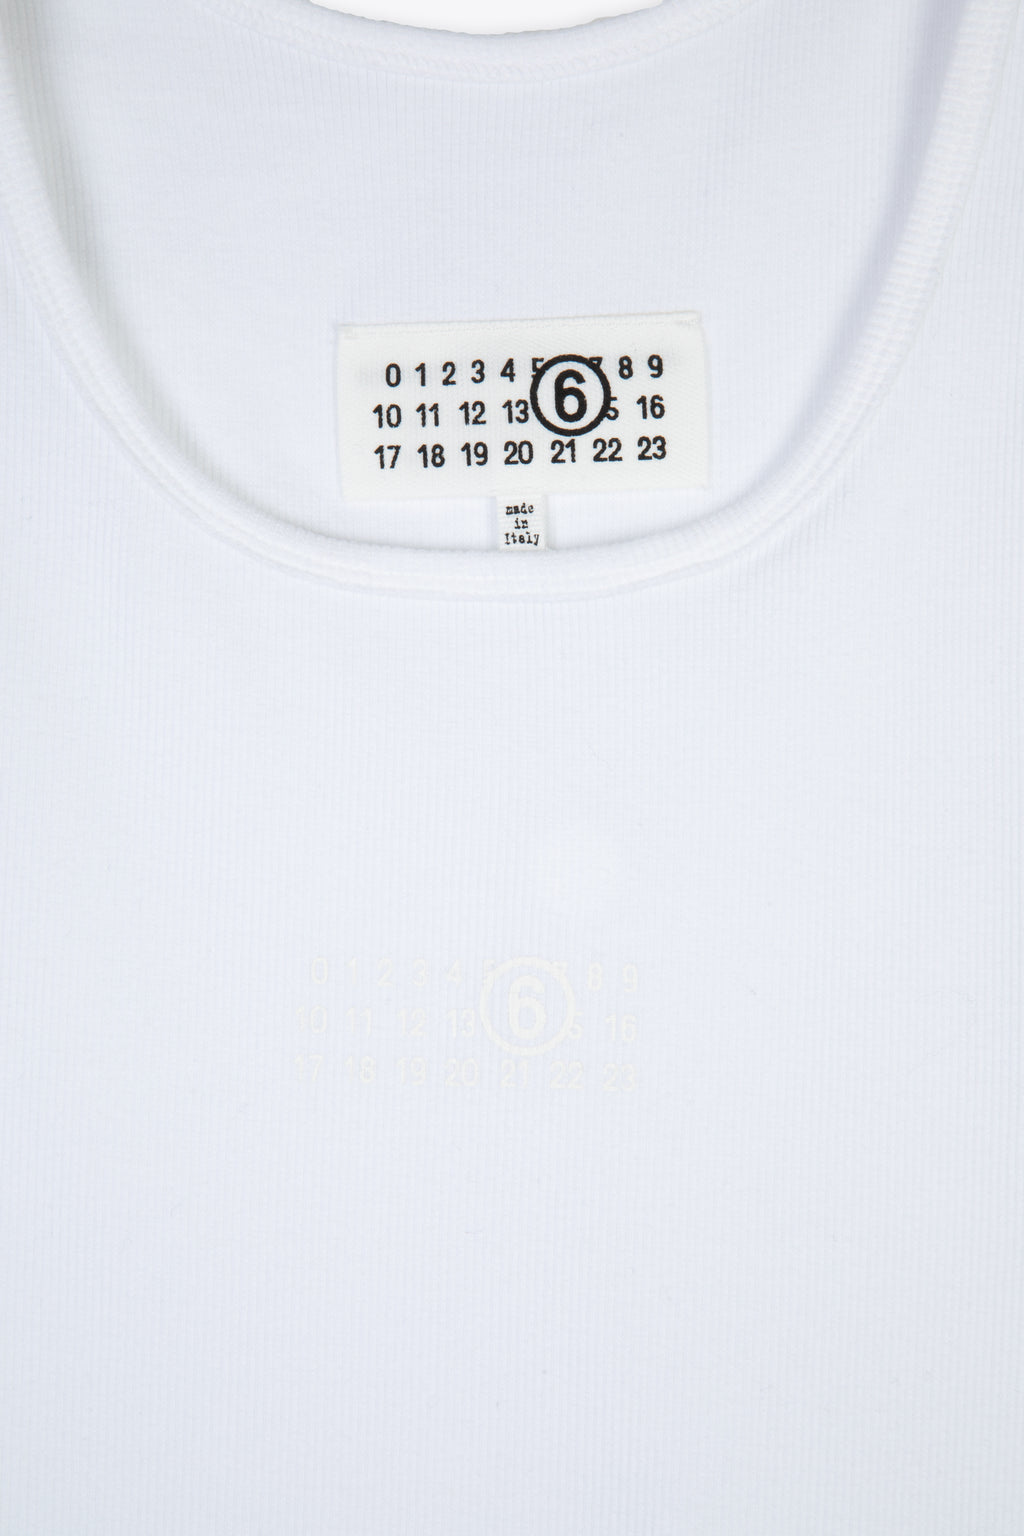 alt-image__White-ribbed-cotton-tank-top-with-logo